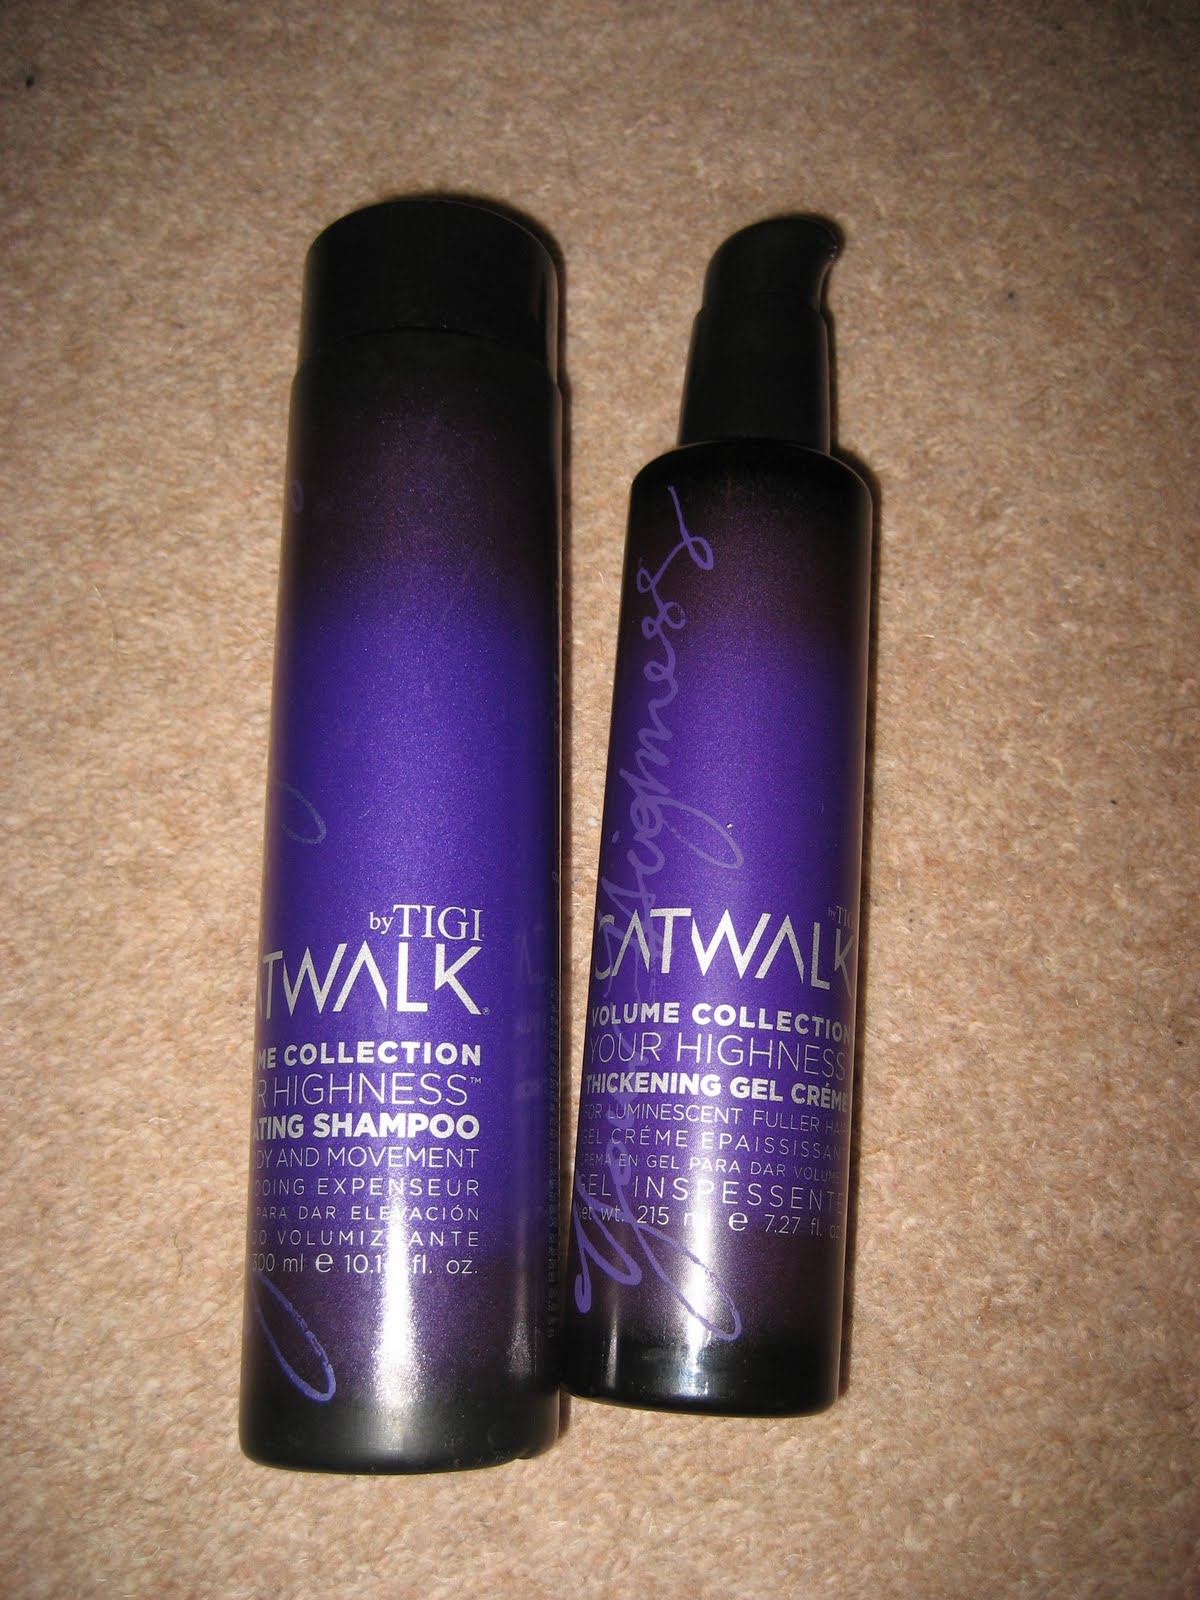 Catwalk Volume Collection: review